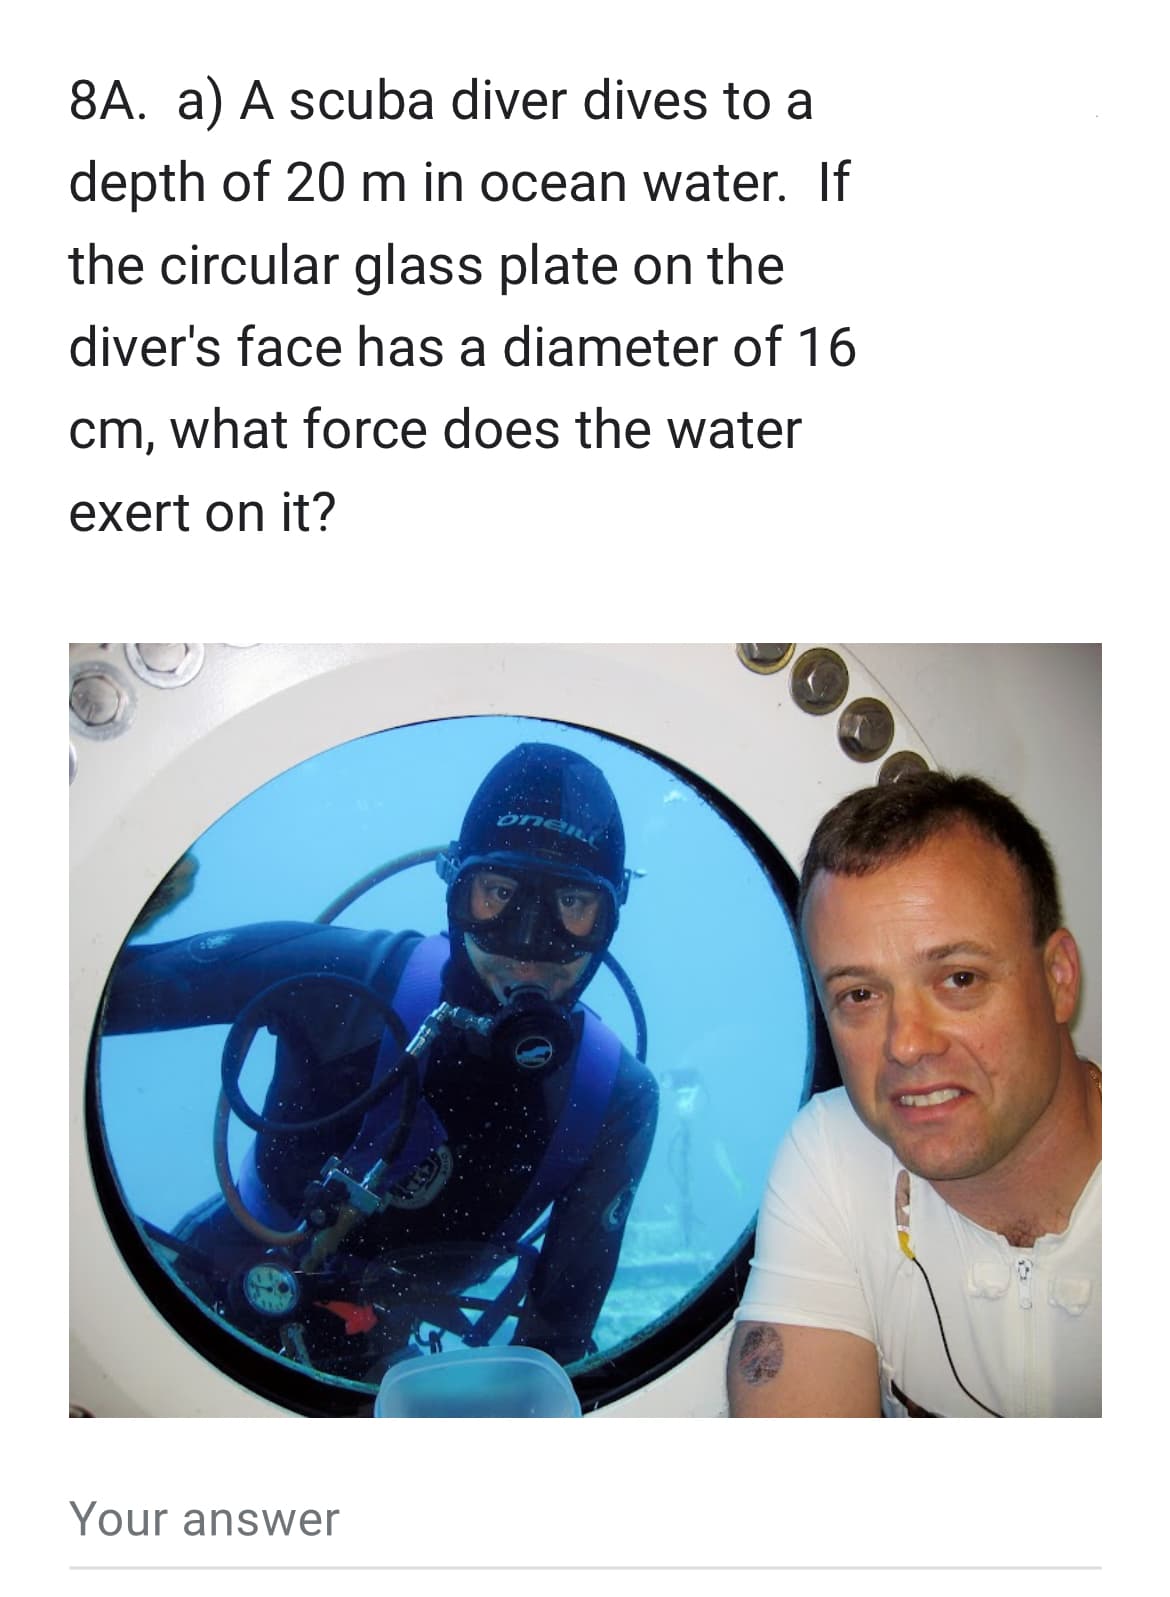 8A. a) A scuba diver dives to a
depth of 20 m in ocean water. If
the circular glass plate on the
diver's face has a diameter of 16
cm, what force does the water
exert on it?
Your answer